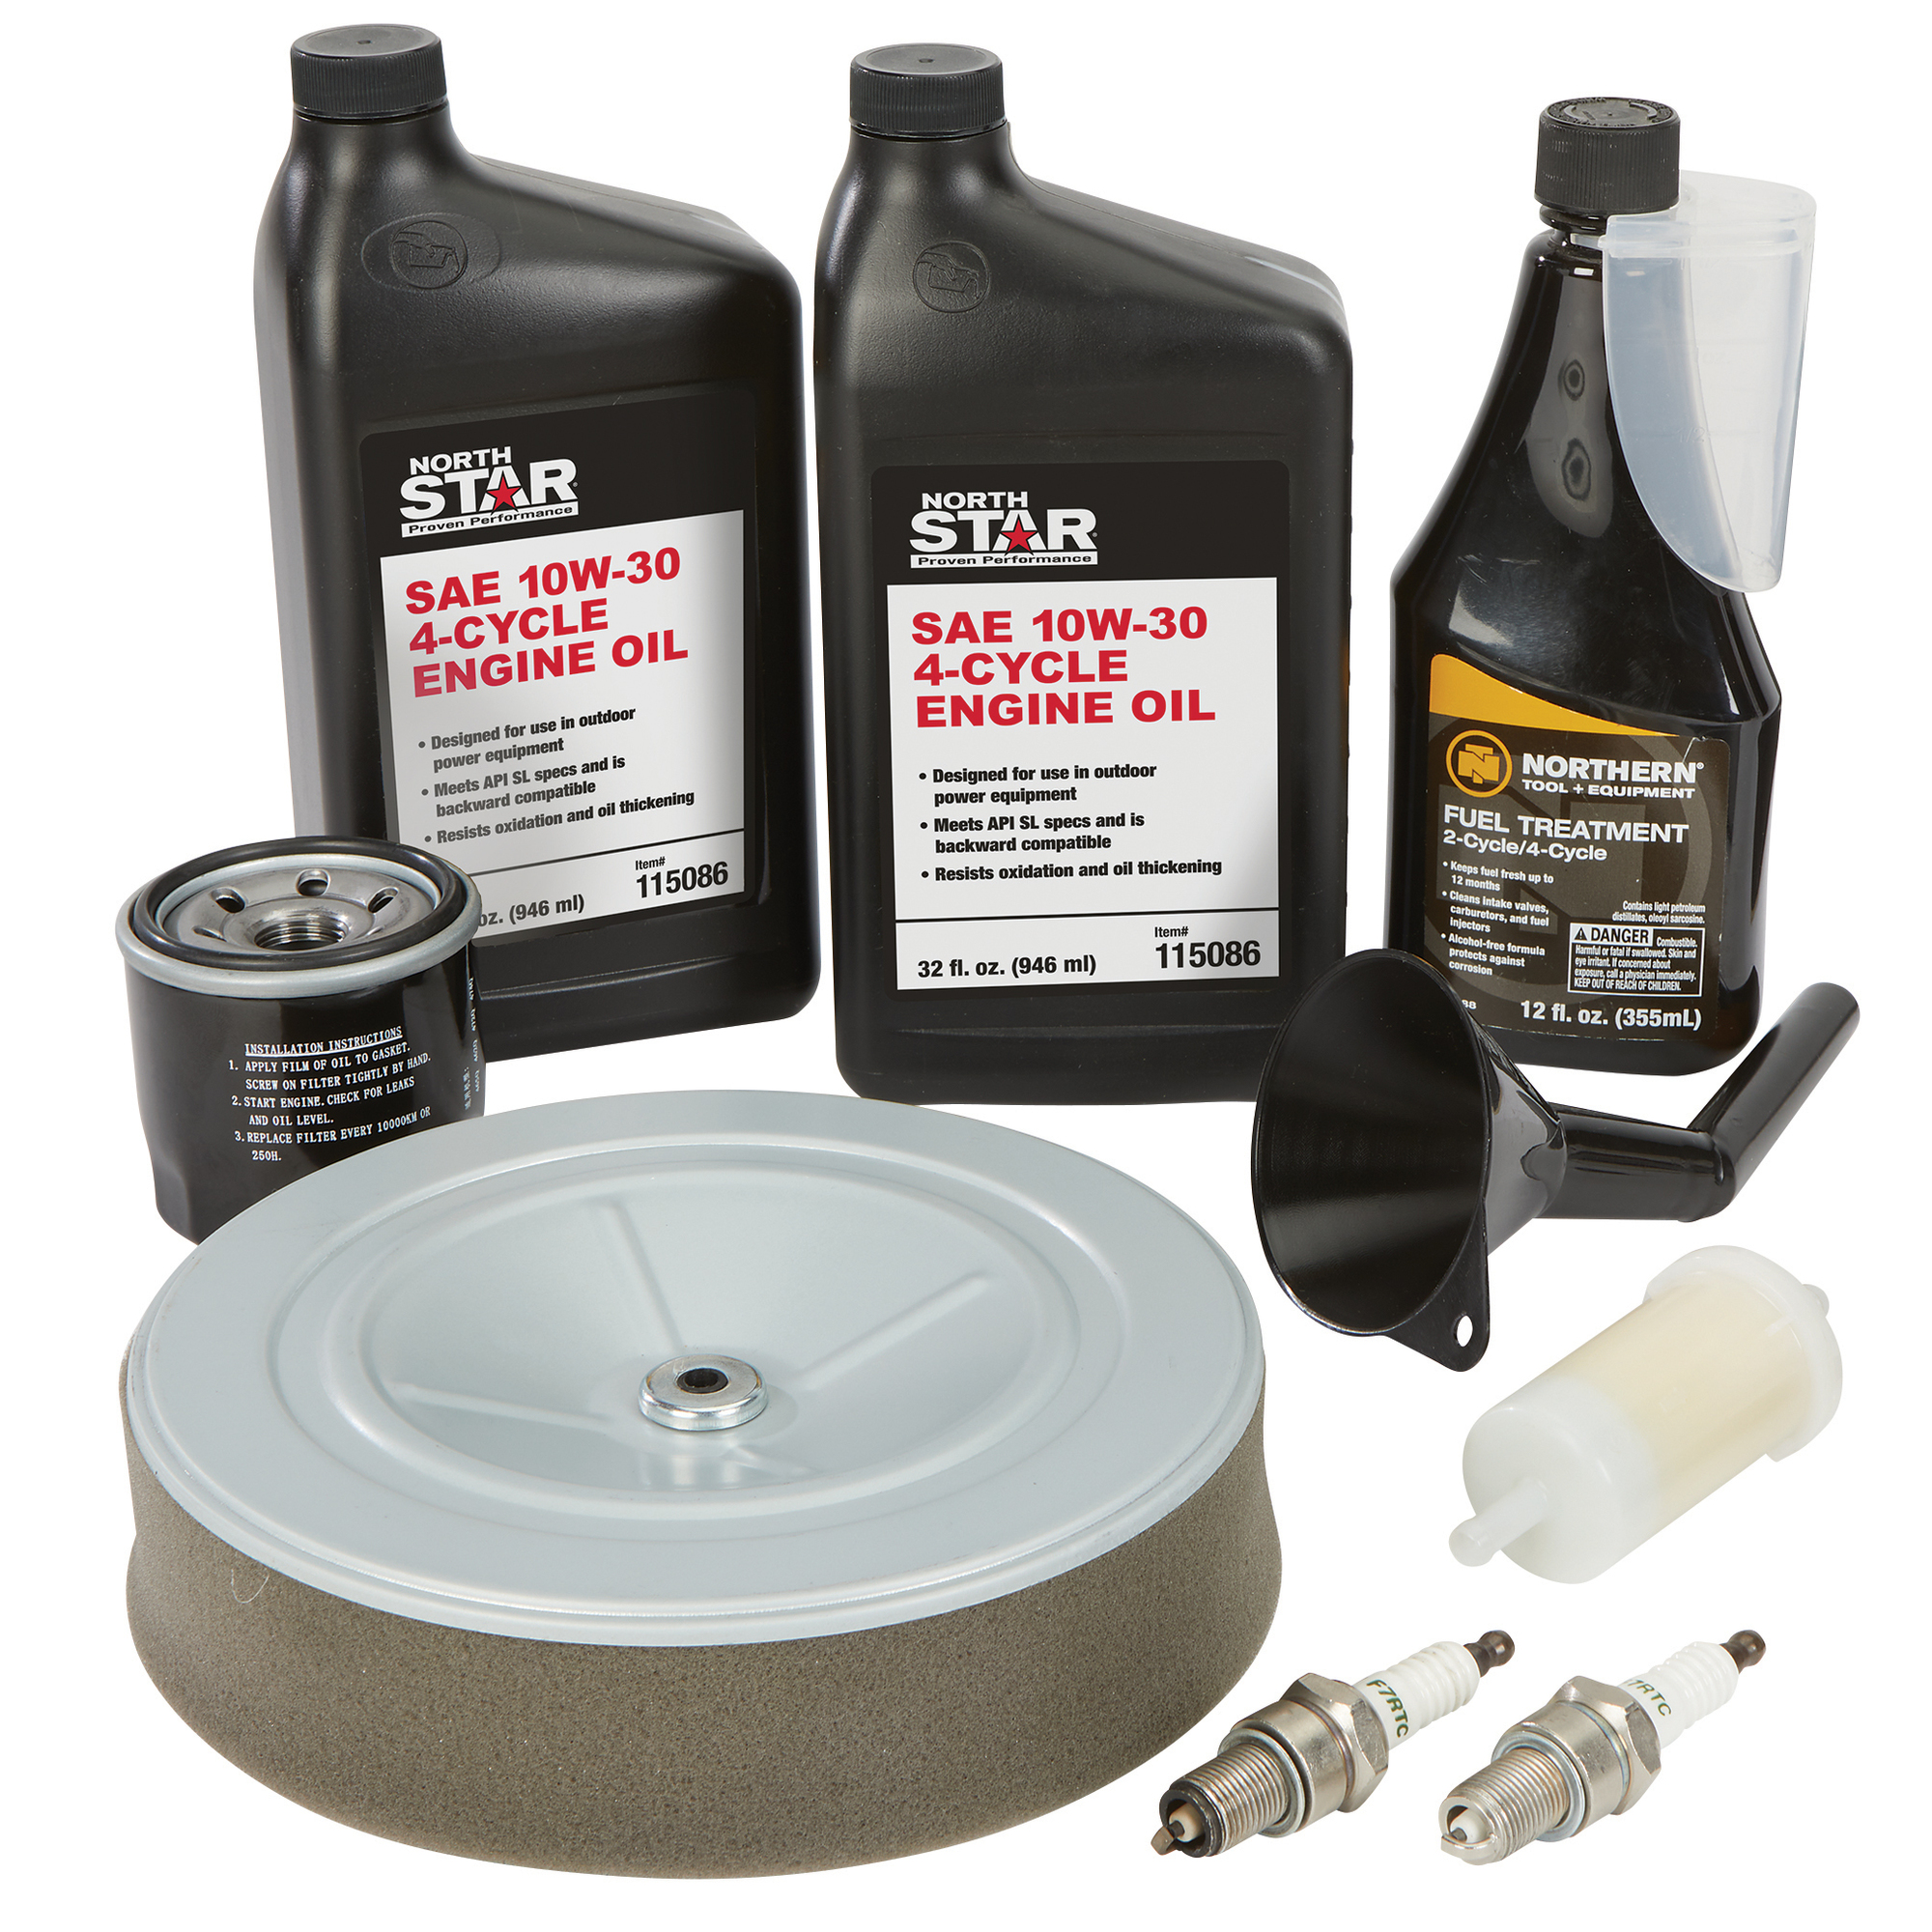 NorthStar Maintenance Kit, Fits NorthStar 670CC, 740CC and 825CC Engines, Model 805646